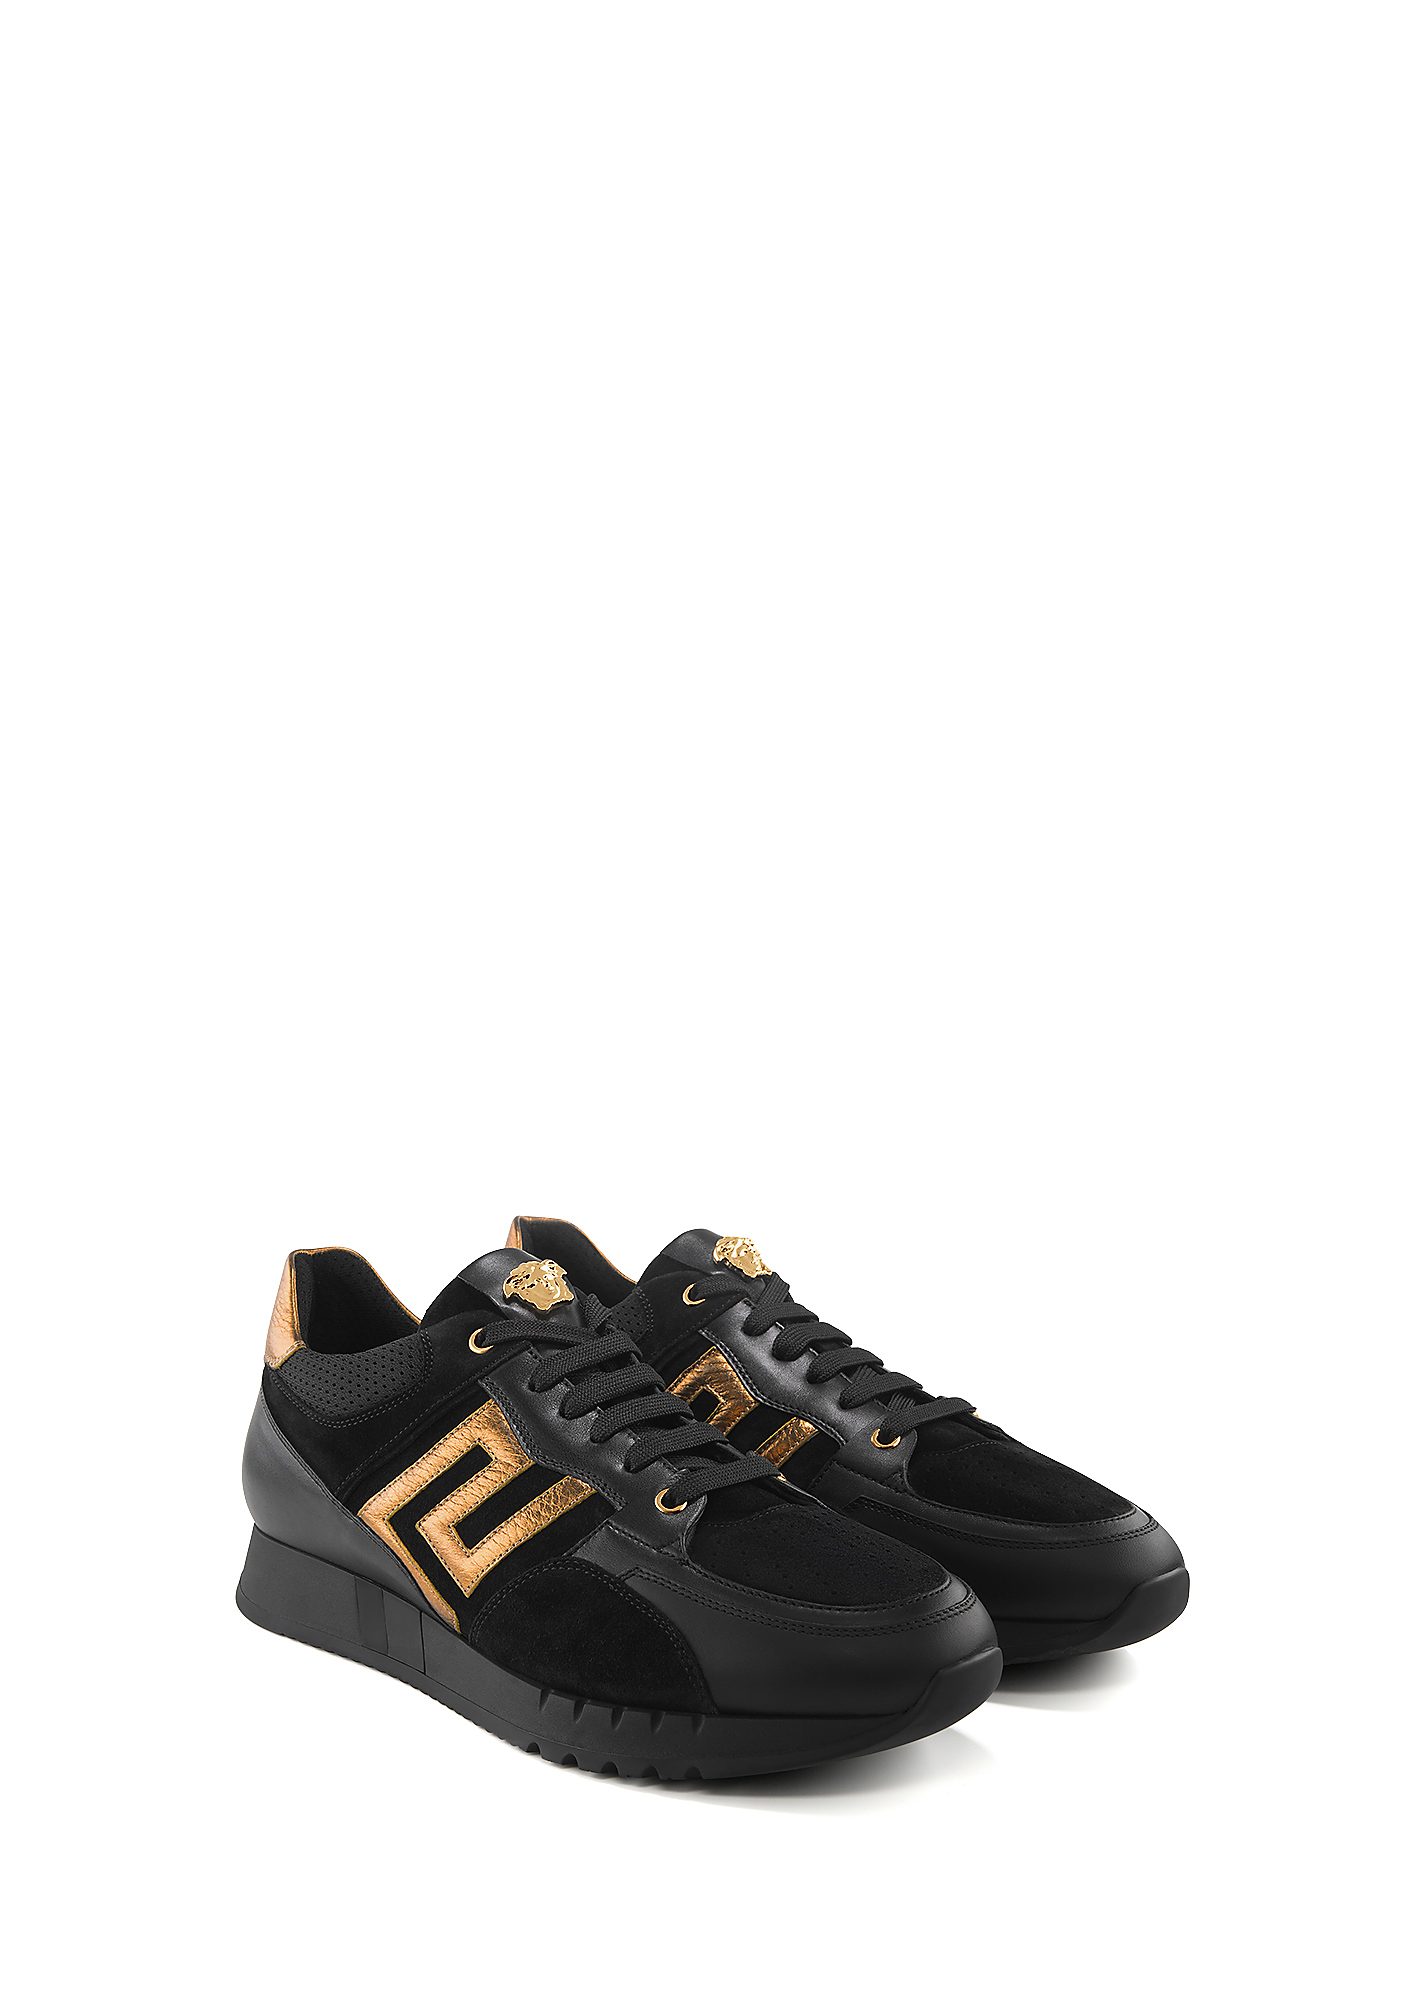 versace black and gold sneakers